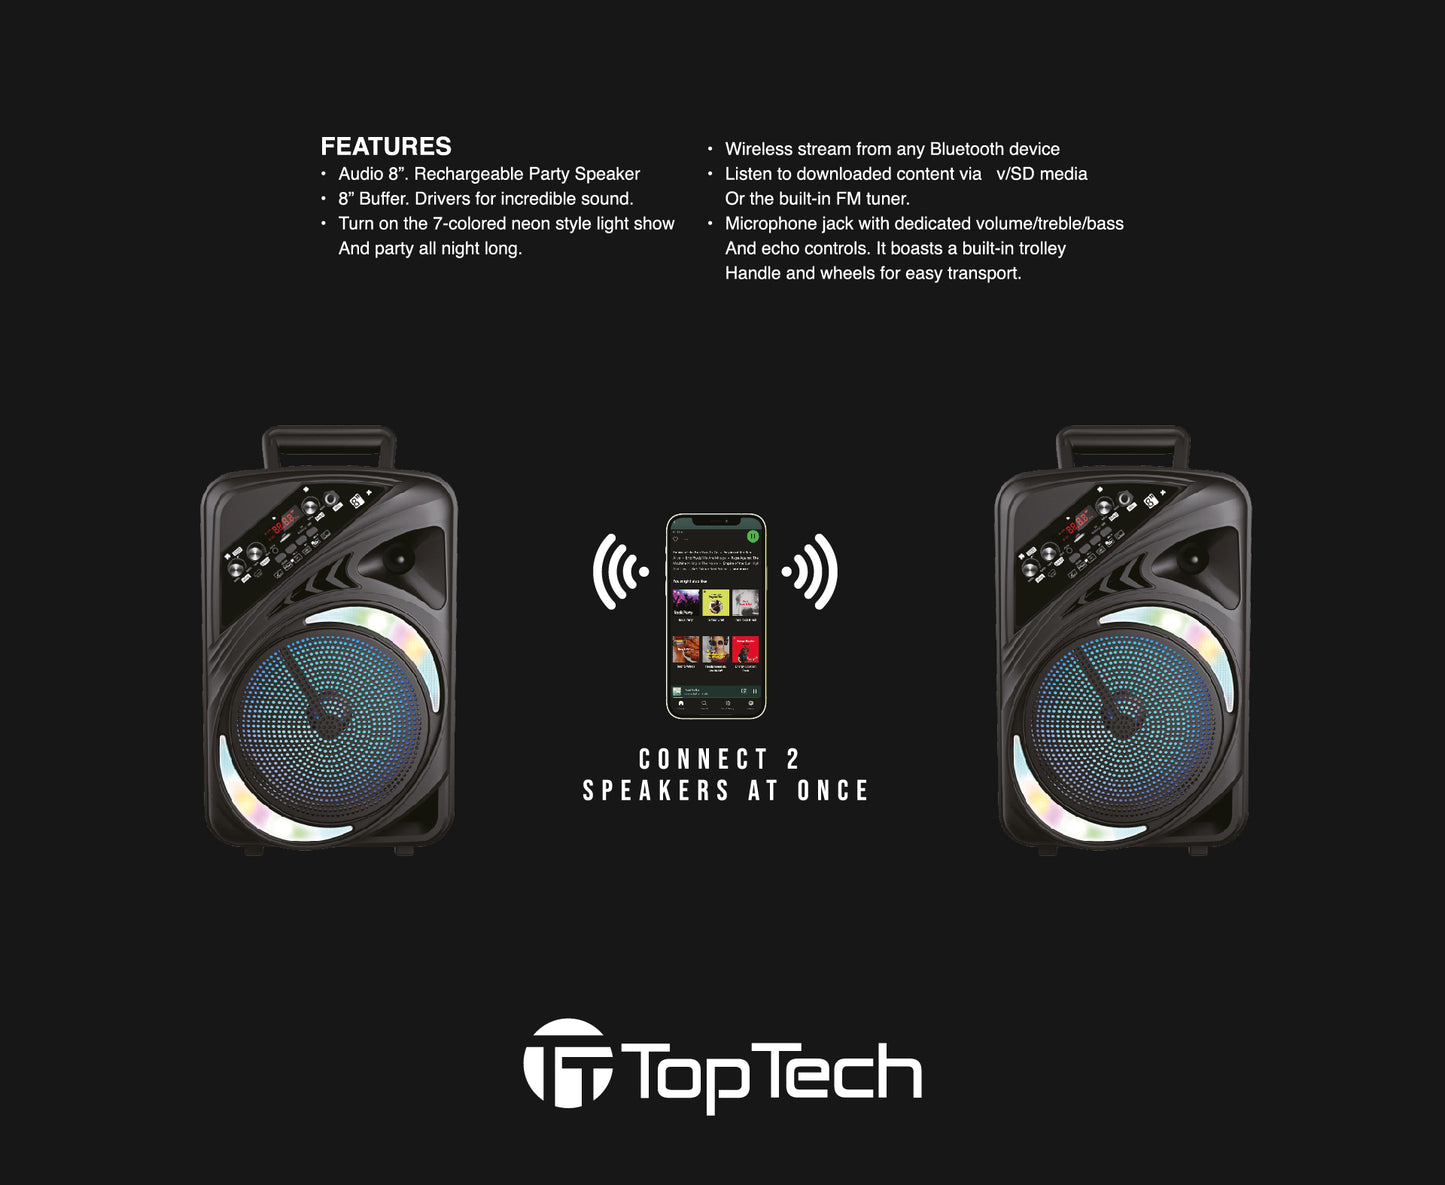 TOPTECH AL-8 Rumble Beat, 8 Inch Bluetooth Speakers with Disco Lights, Wireless Stereo Sound with Wireless Microphone，Up to 10 Meters (33ft) Bluetooth Distance,Crystal Clear Sound with stand, Rechargeable Long Battery Life for Party Outdoor Camping